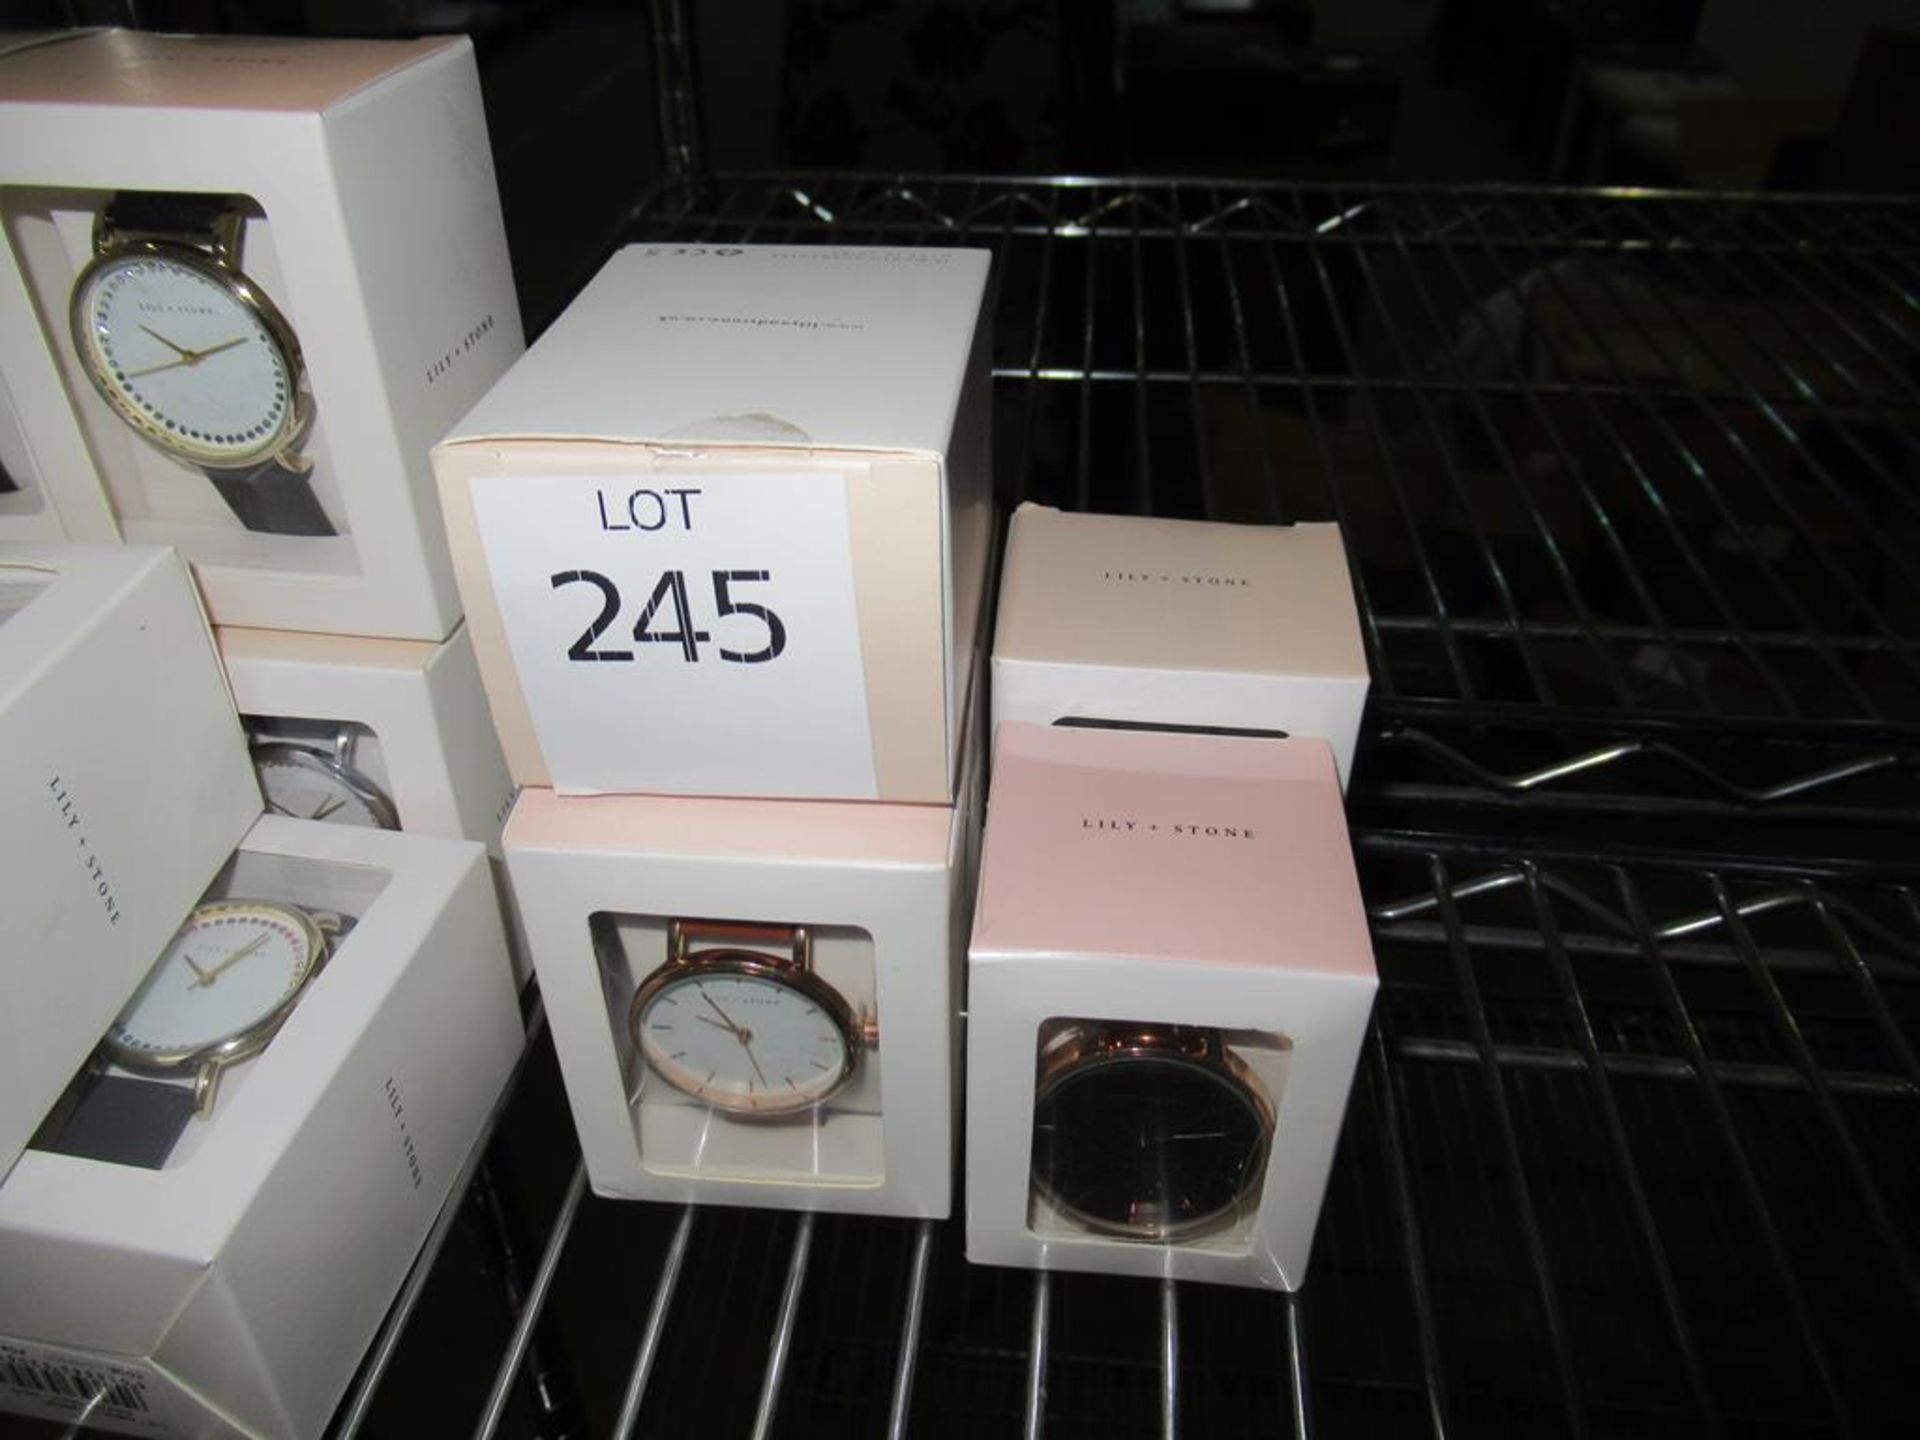 5x assorted Lily and Stone watches, total approx. RP £135 - Image 3 of 3